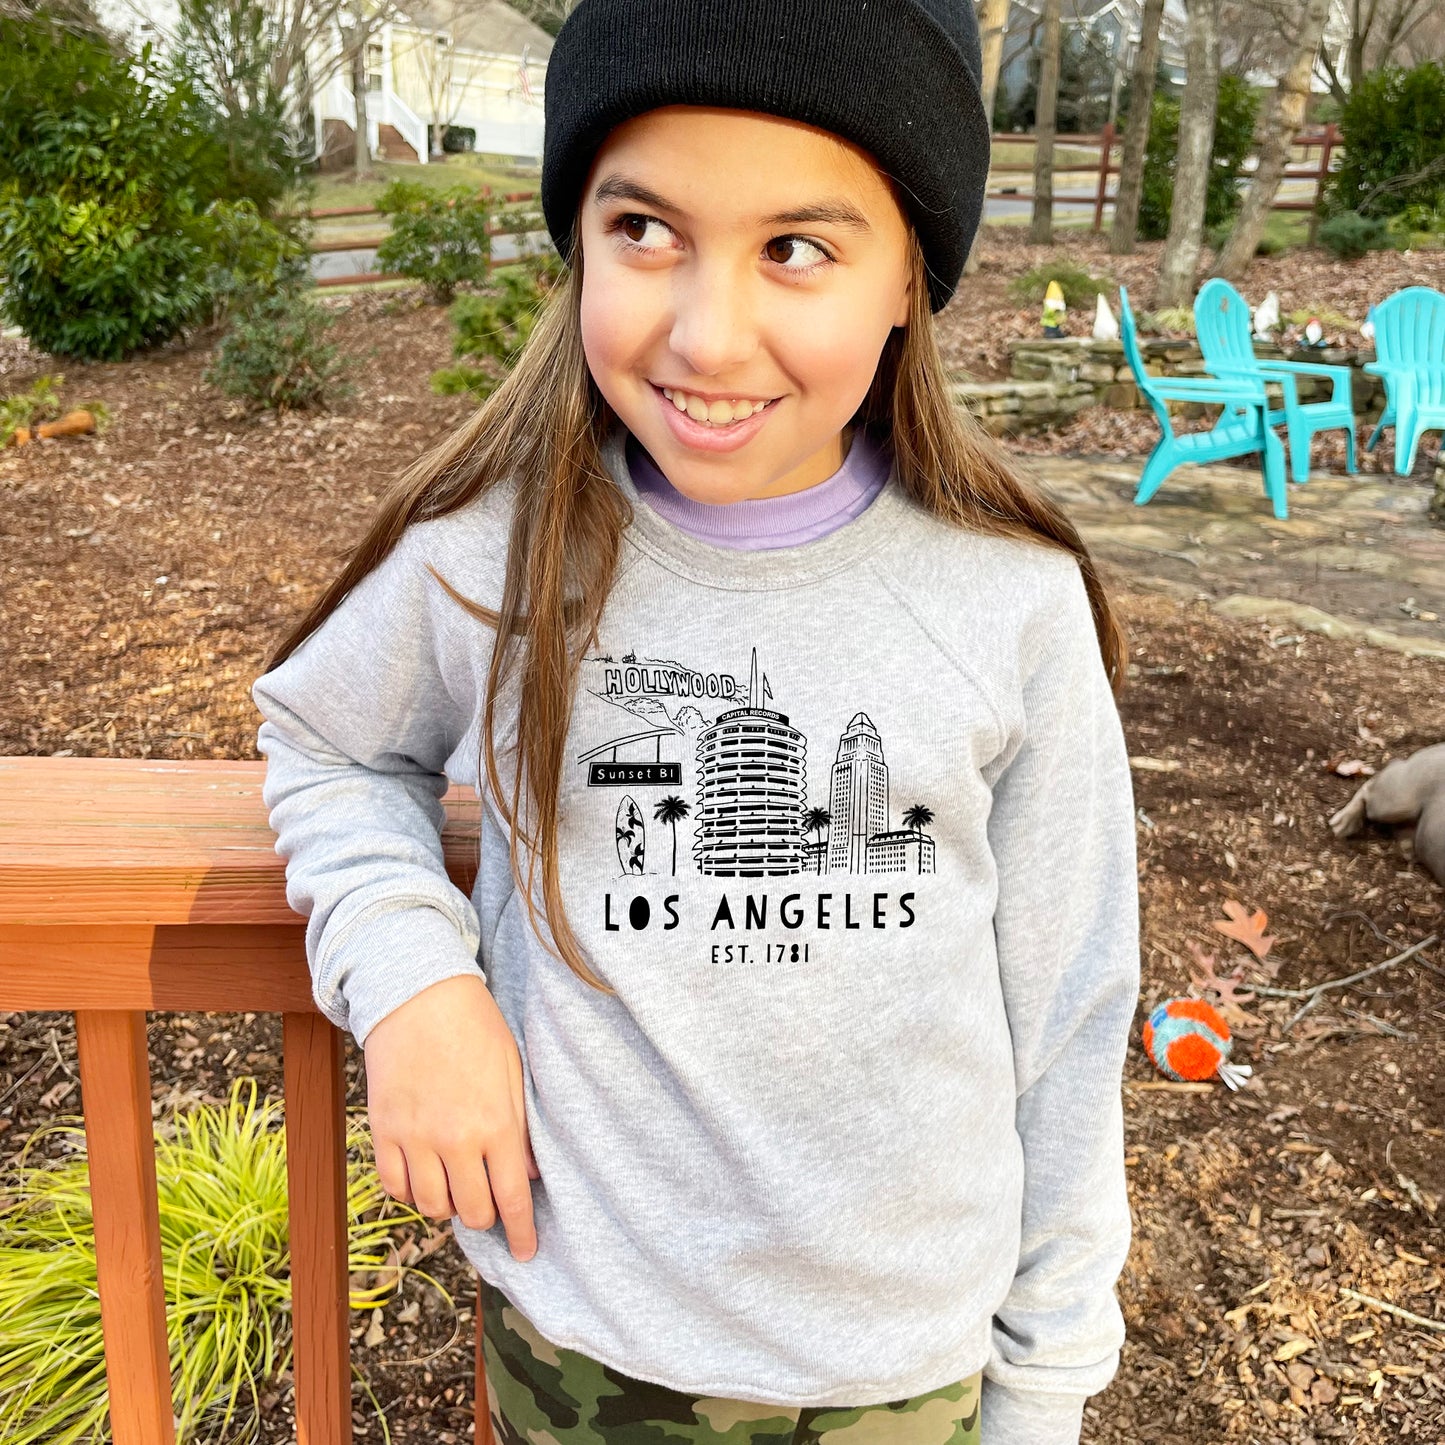 a young girl wearing a los angeles sweatshirt and camo pants